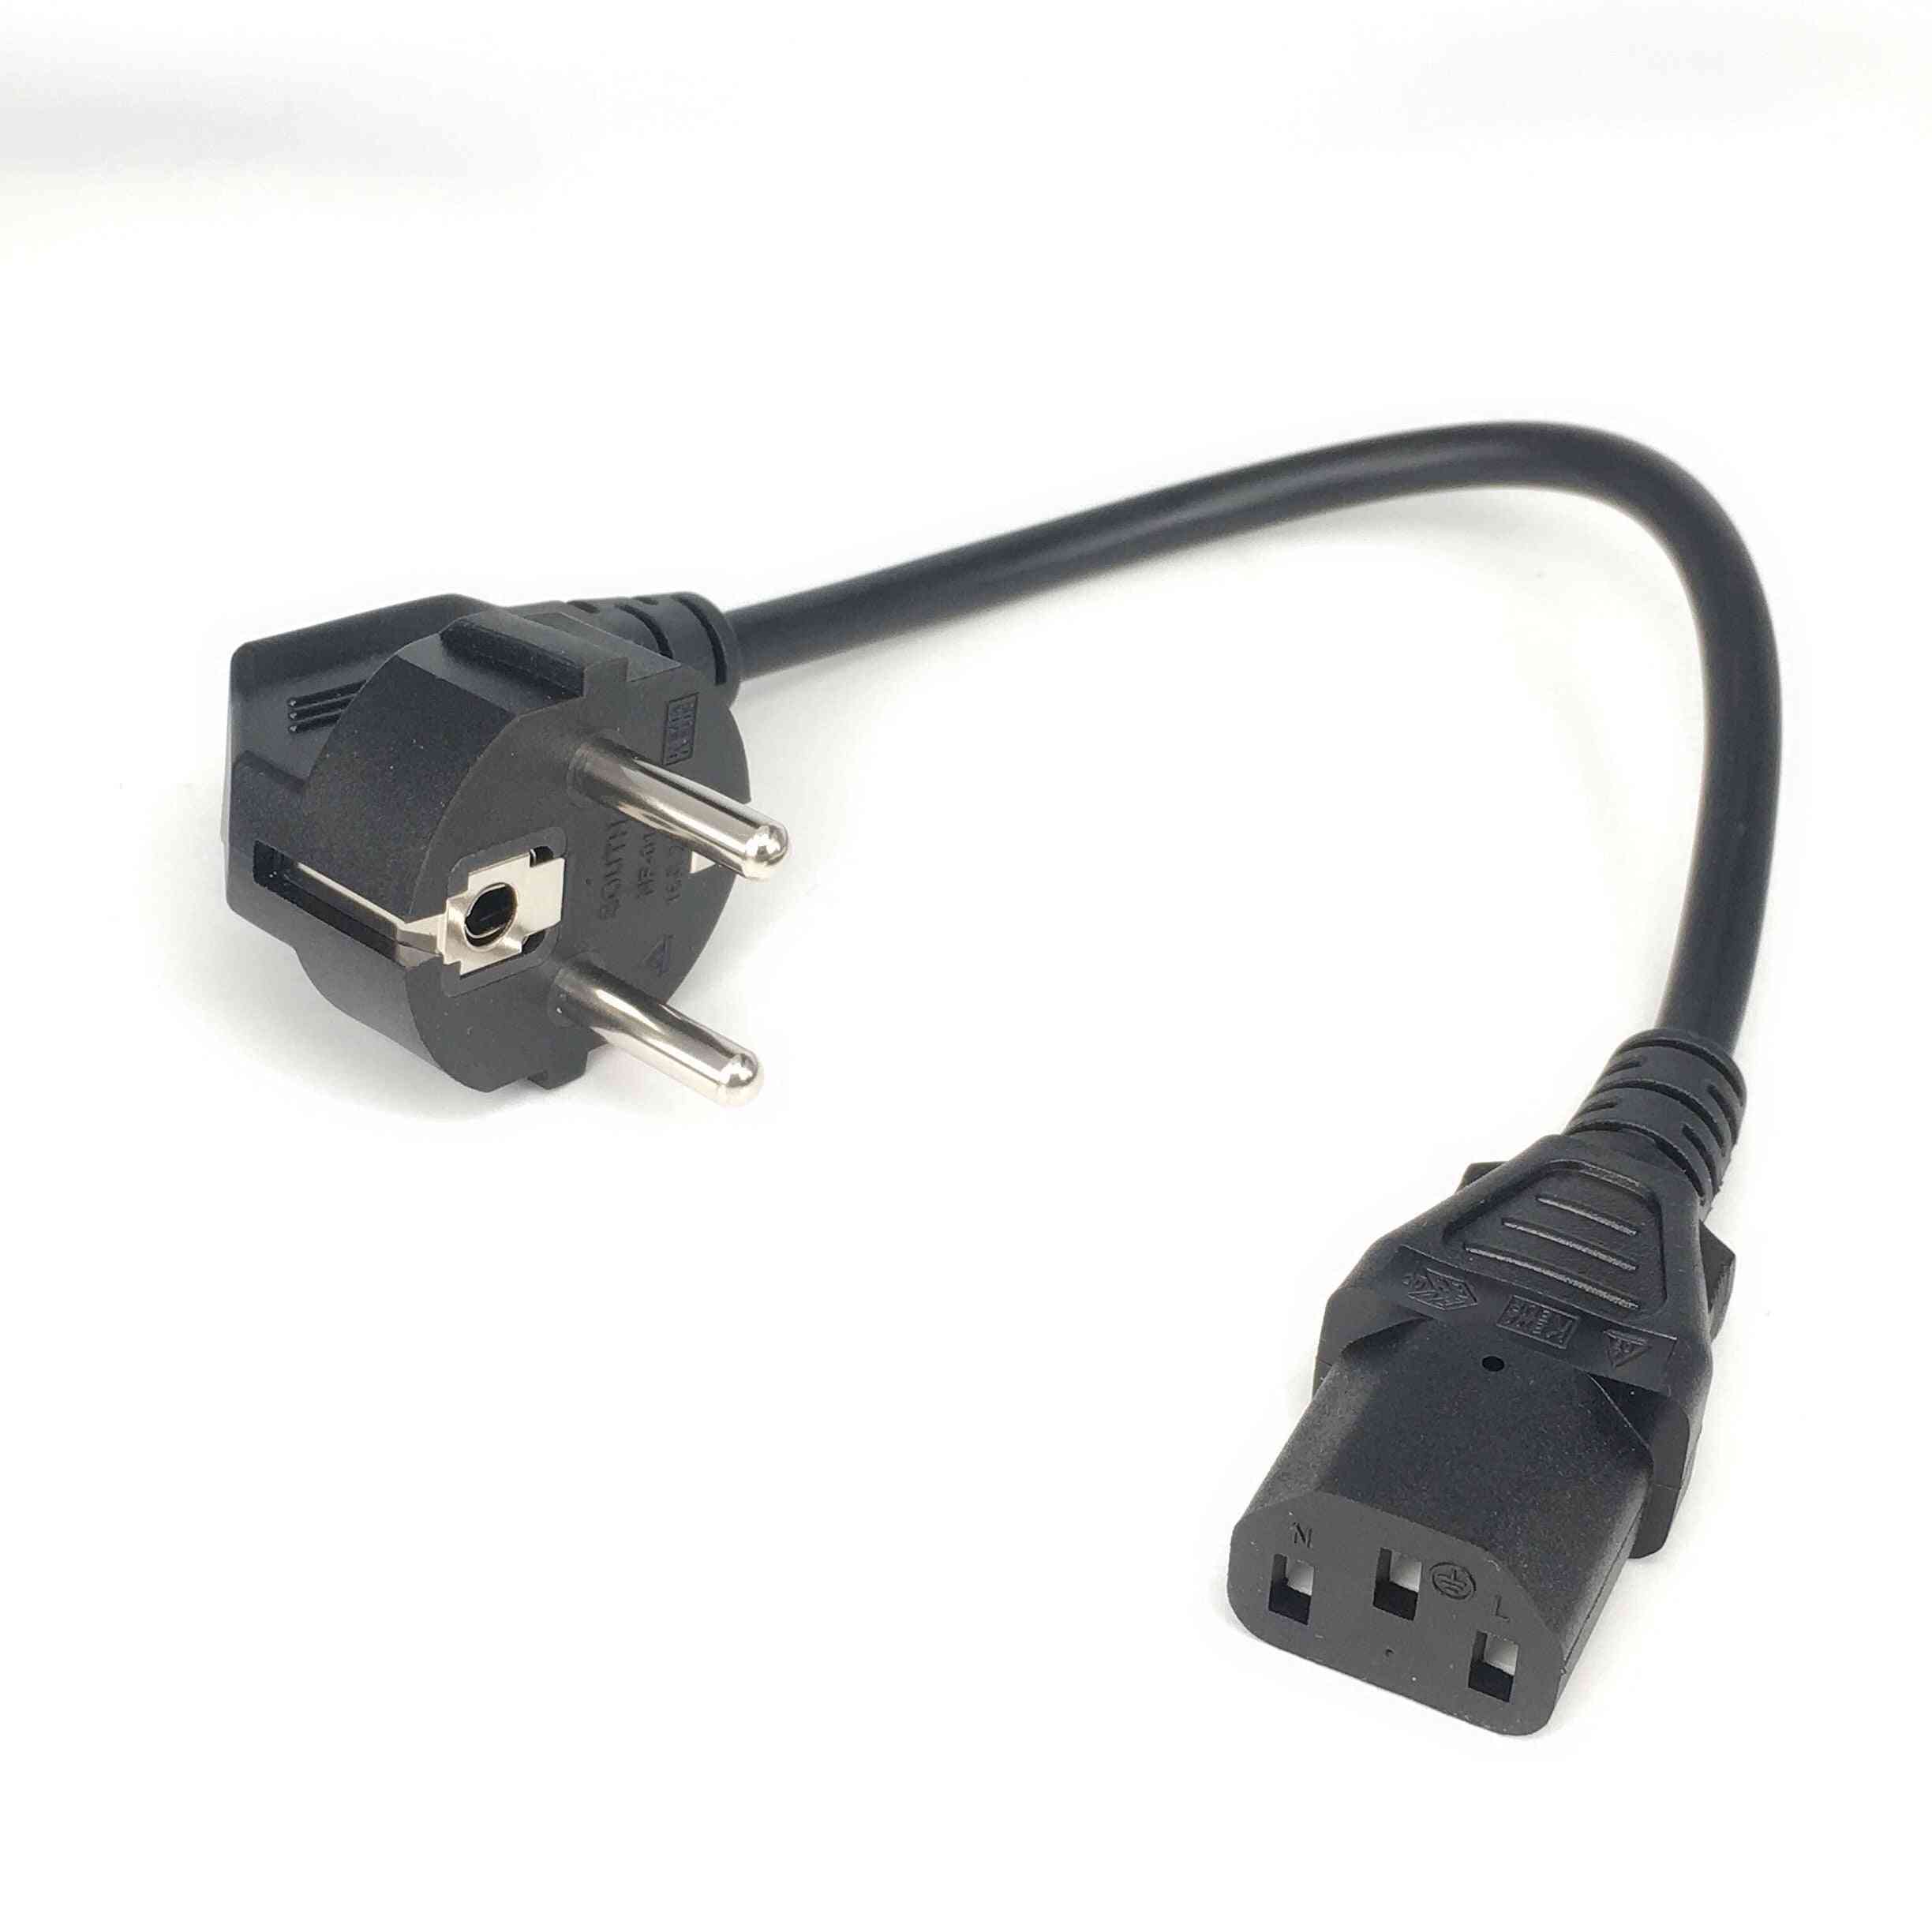 Power Cords Cable Short To Adapters Chargers